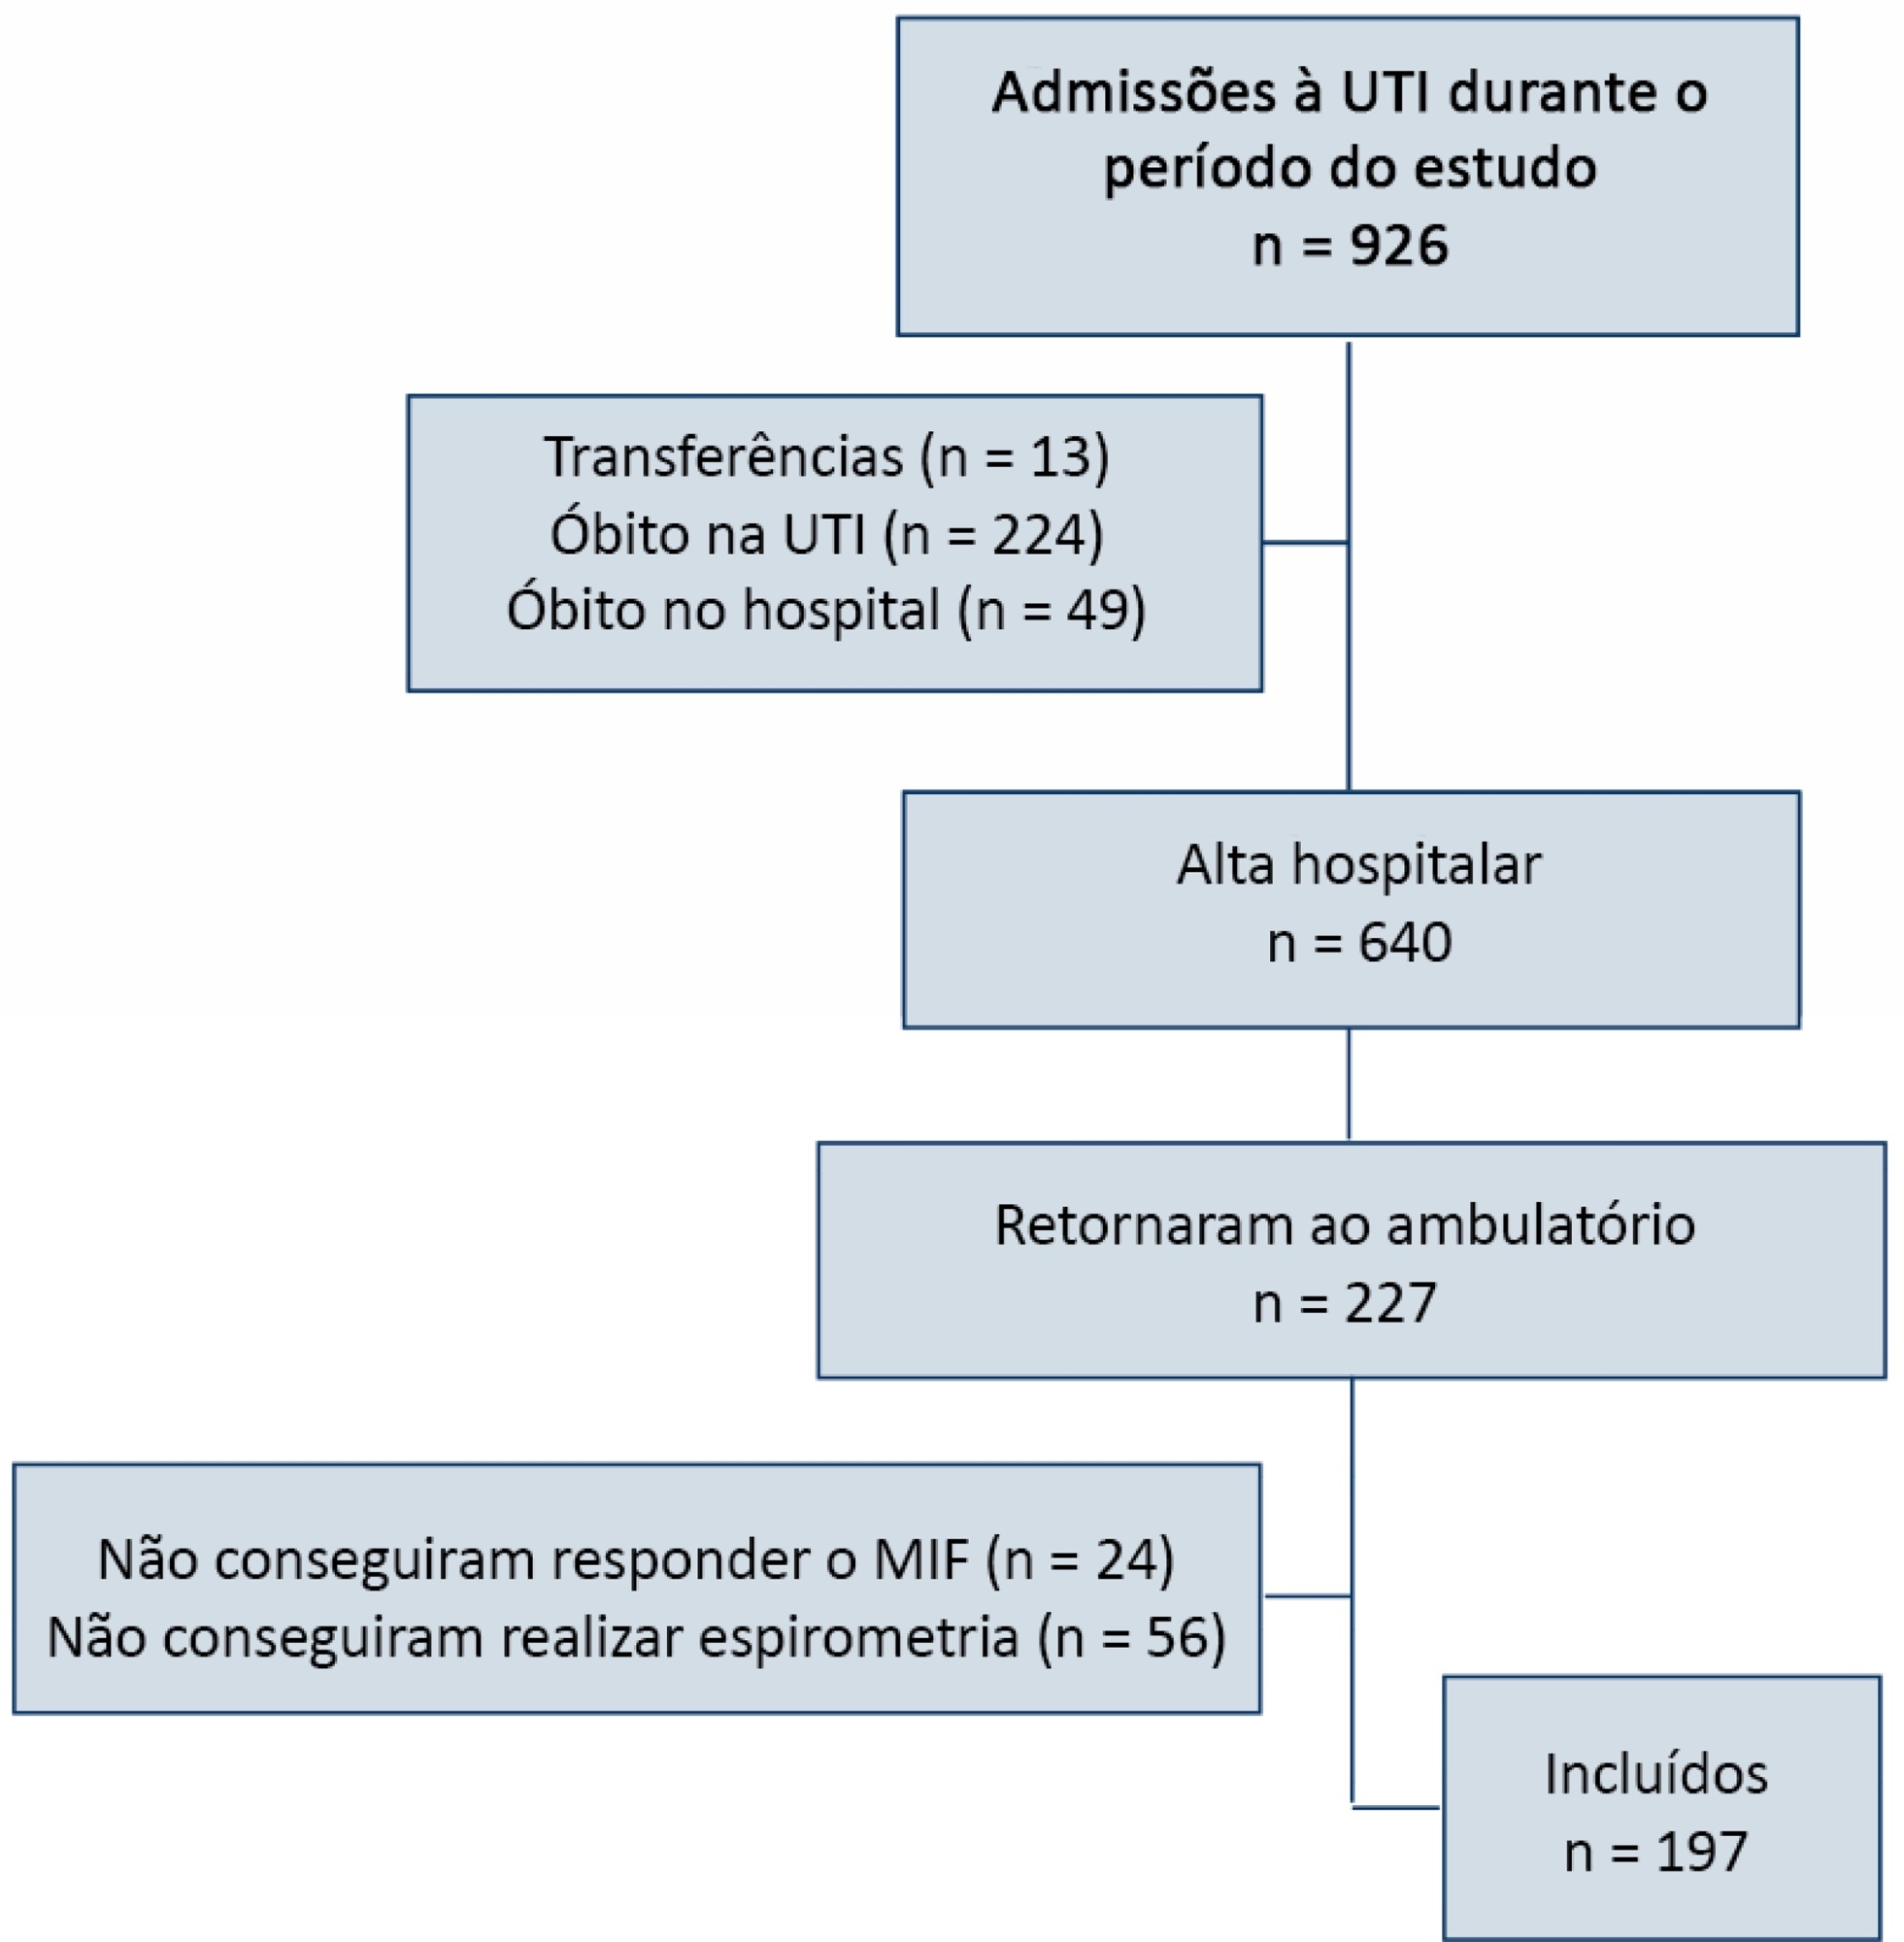 Functional independence and spirometry in adult post-intensive care unit patients